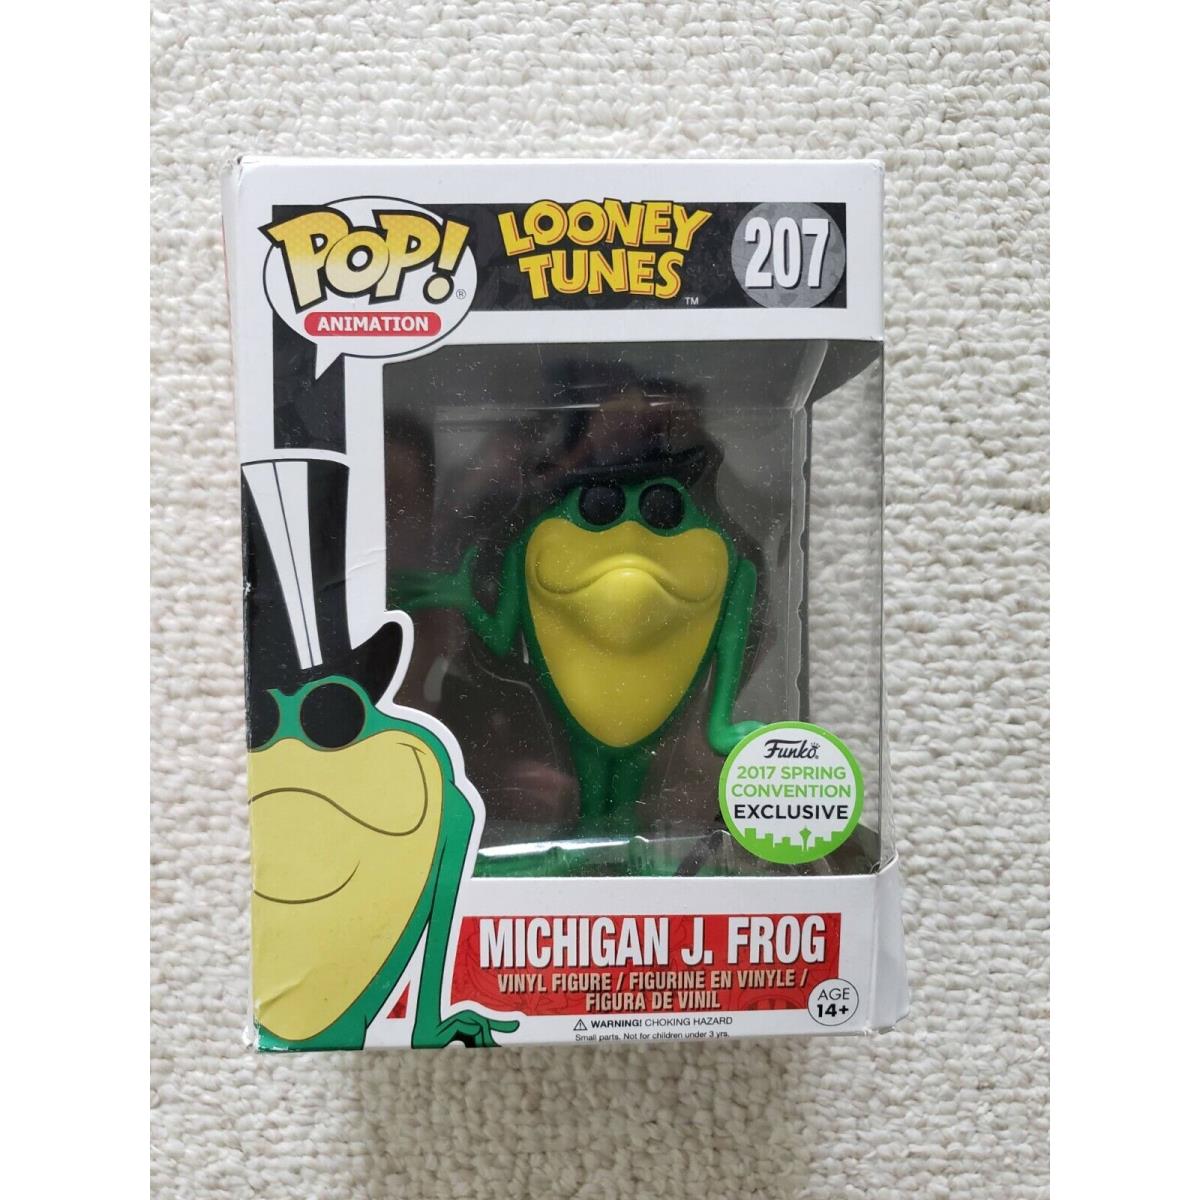 Funko Pop Animation Looney Tunes Michigan J. Frog 2017 Spring Convention Toy